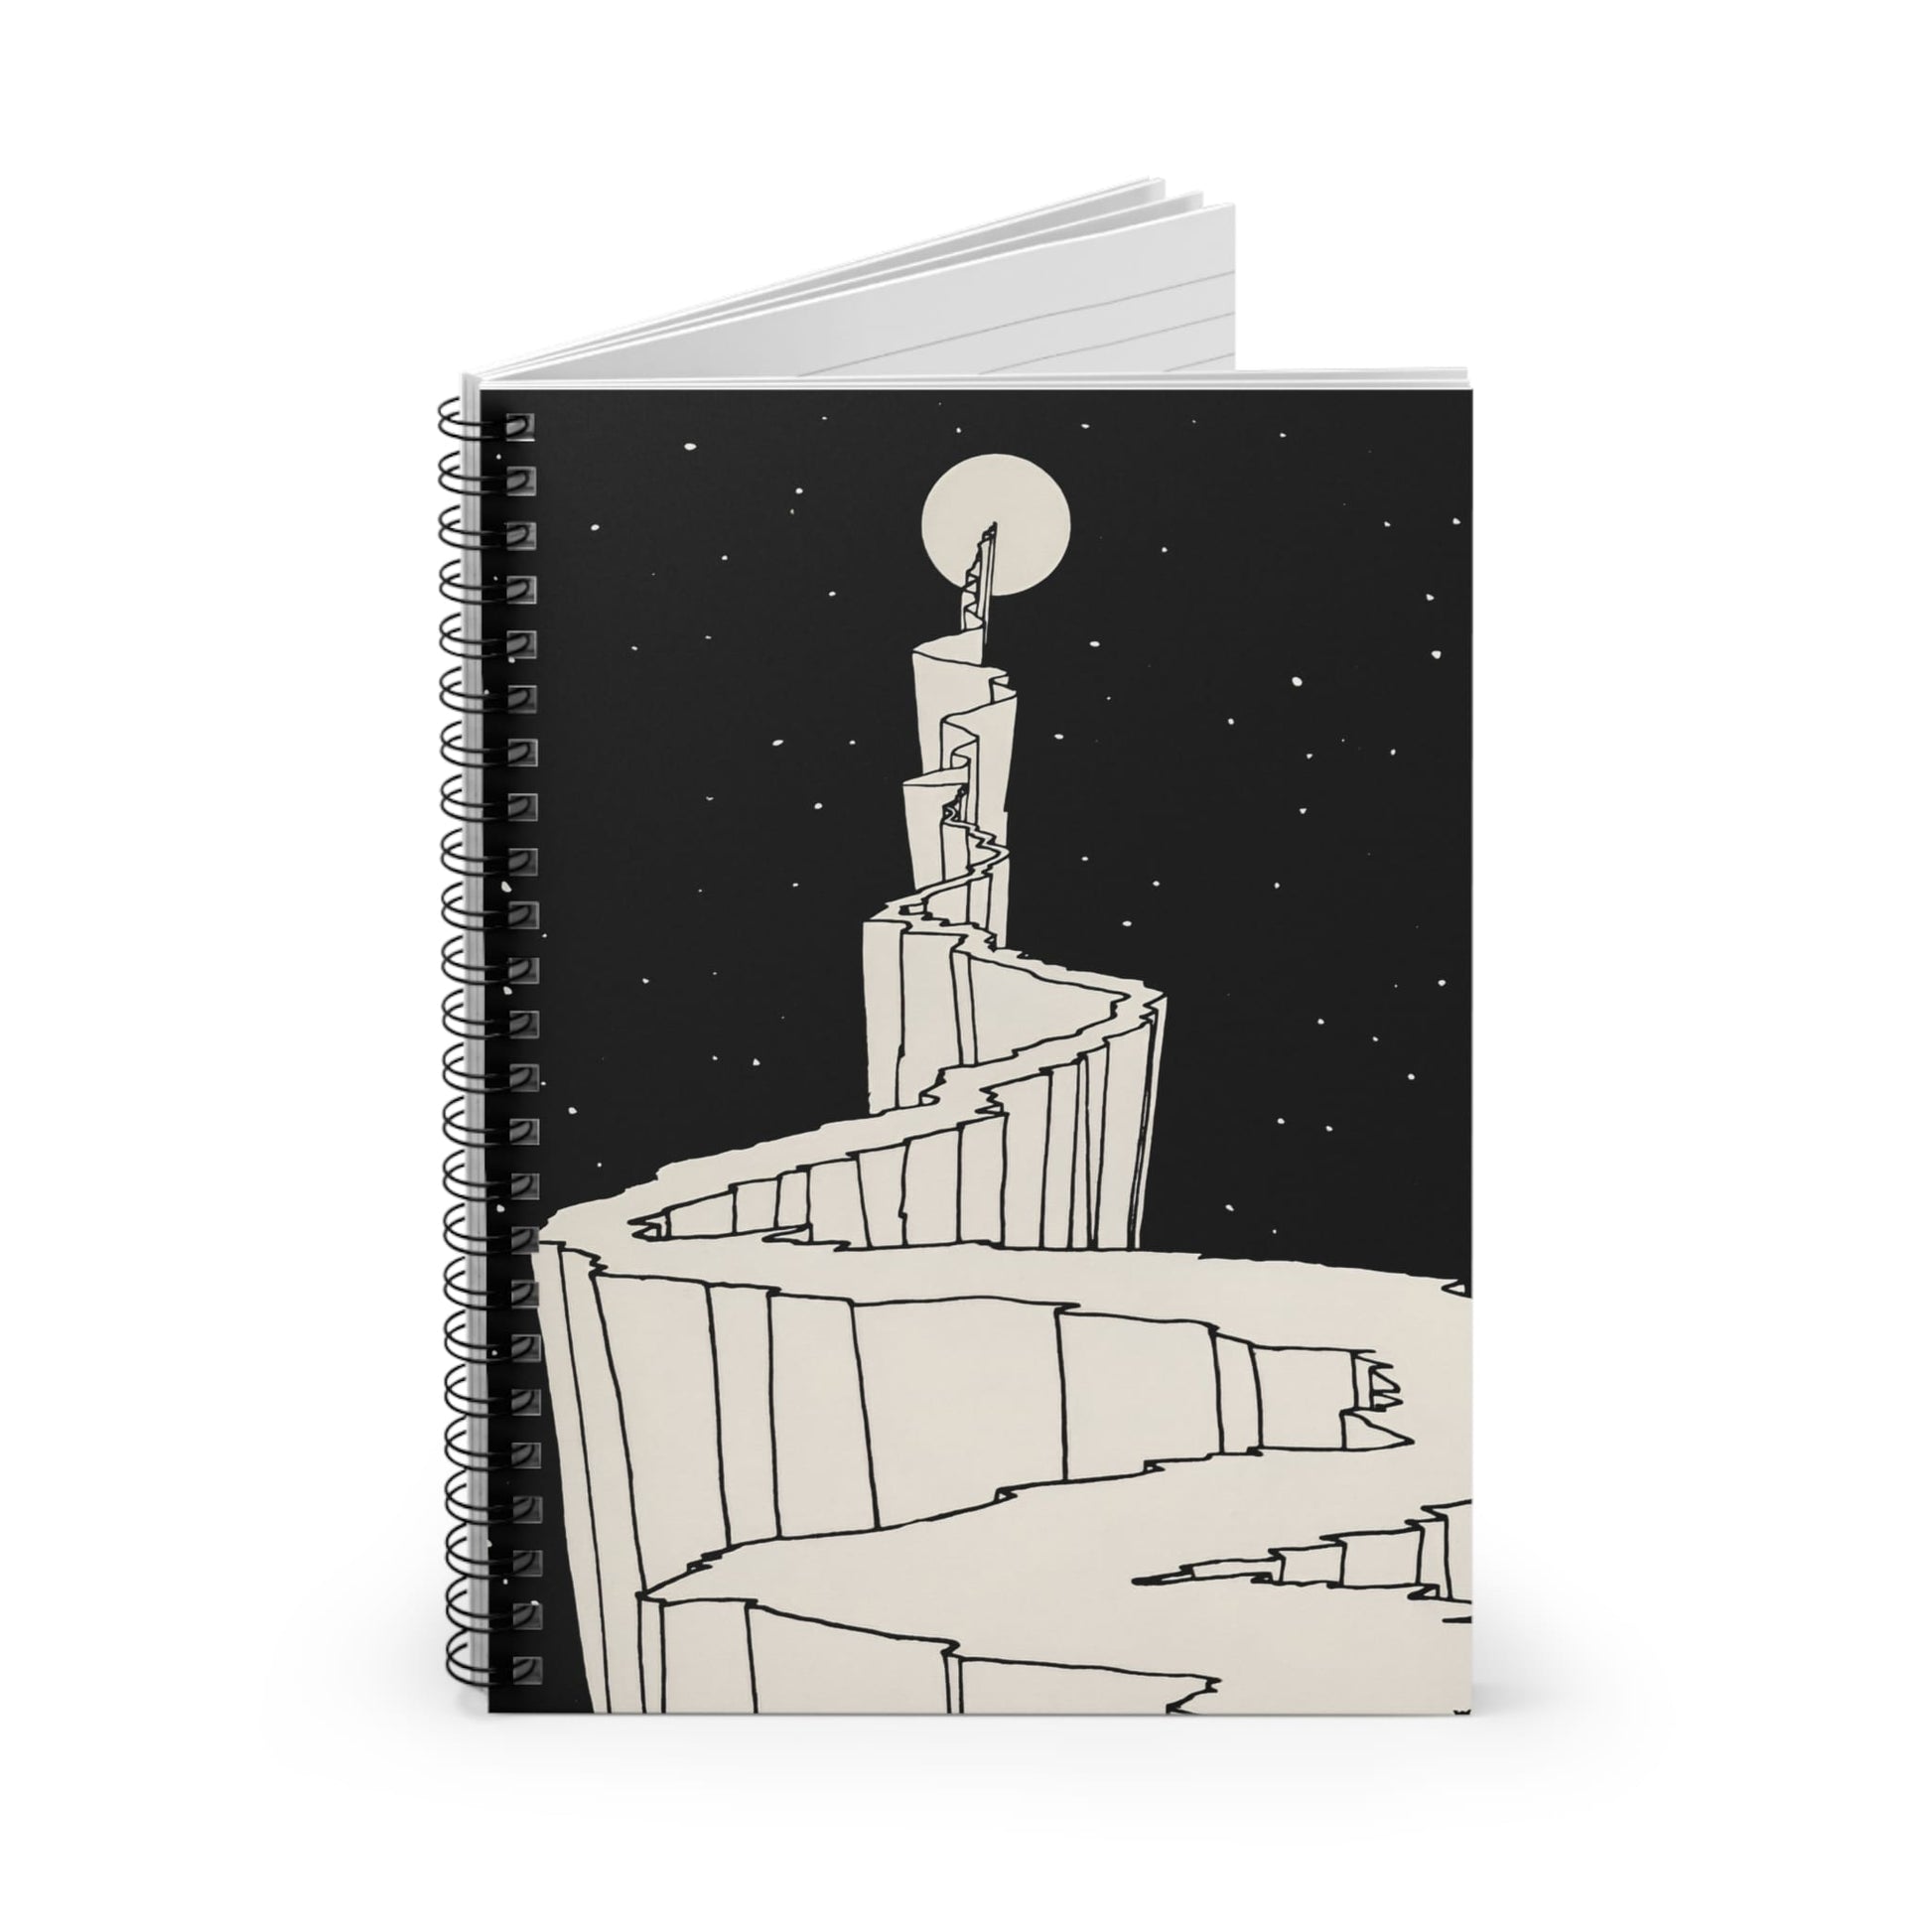 Black and White Fantasy Spiral Notebook Standing up on White Desk